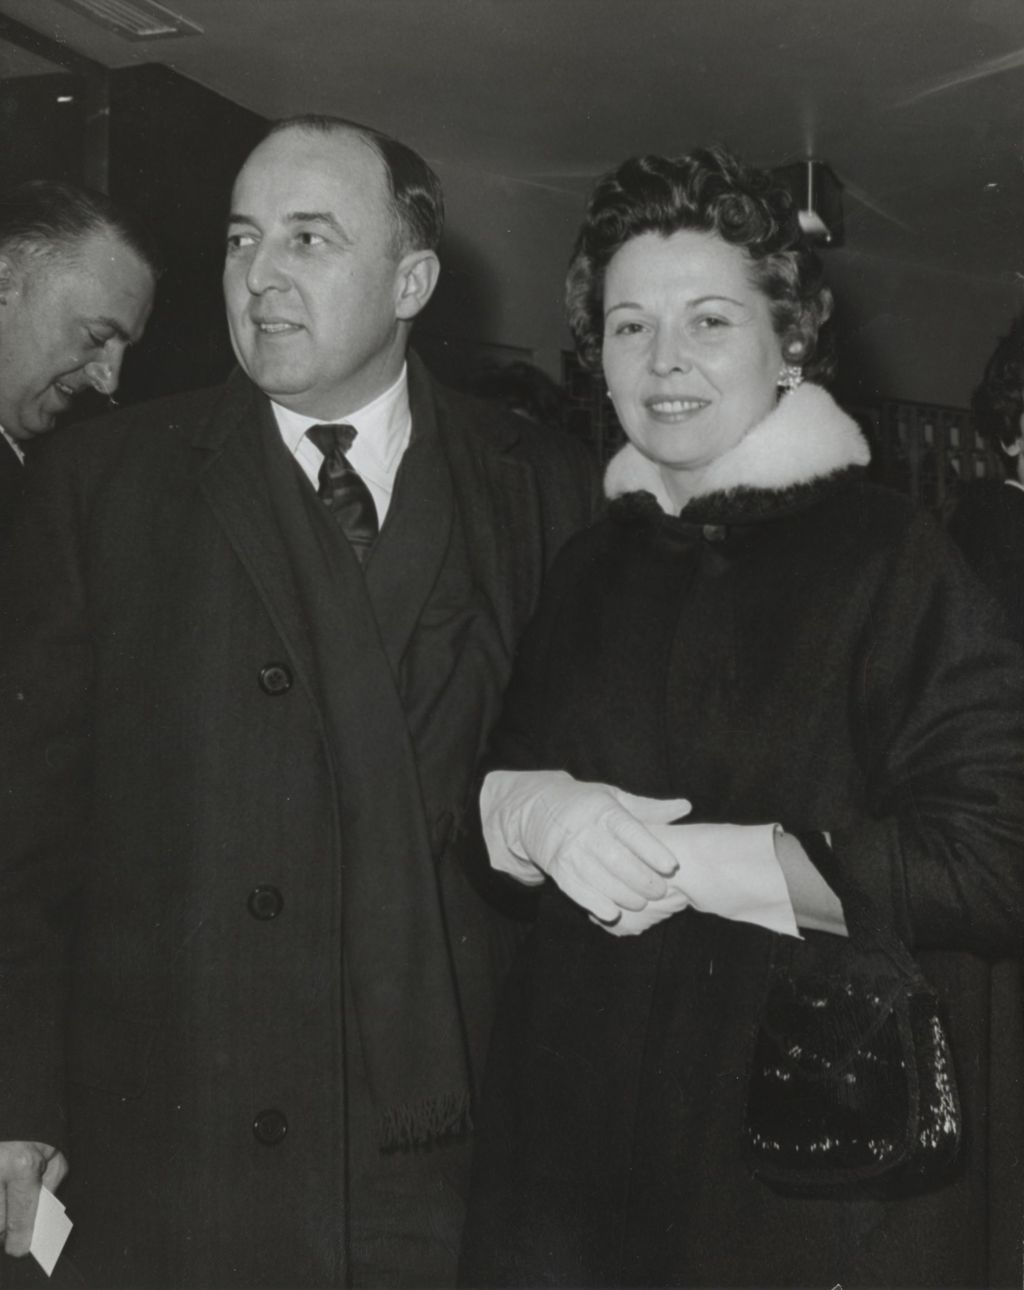 Miniature of Author and journalist Emmett Dedmon and his wife, Claire Lyons Dedmon, at the Chicago premiere of the film West Side Story at the Michael Todd Theatre. The premiere was a benefit for Hull-House